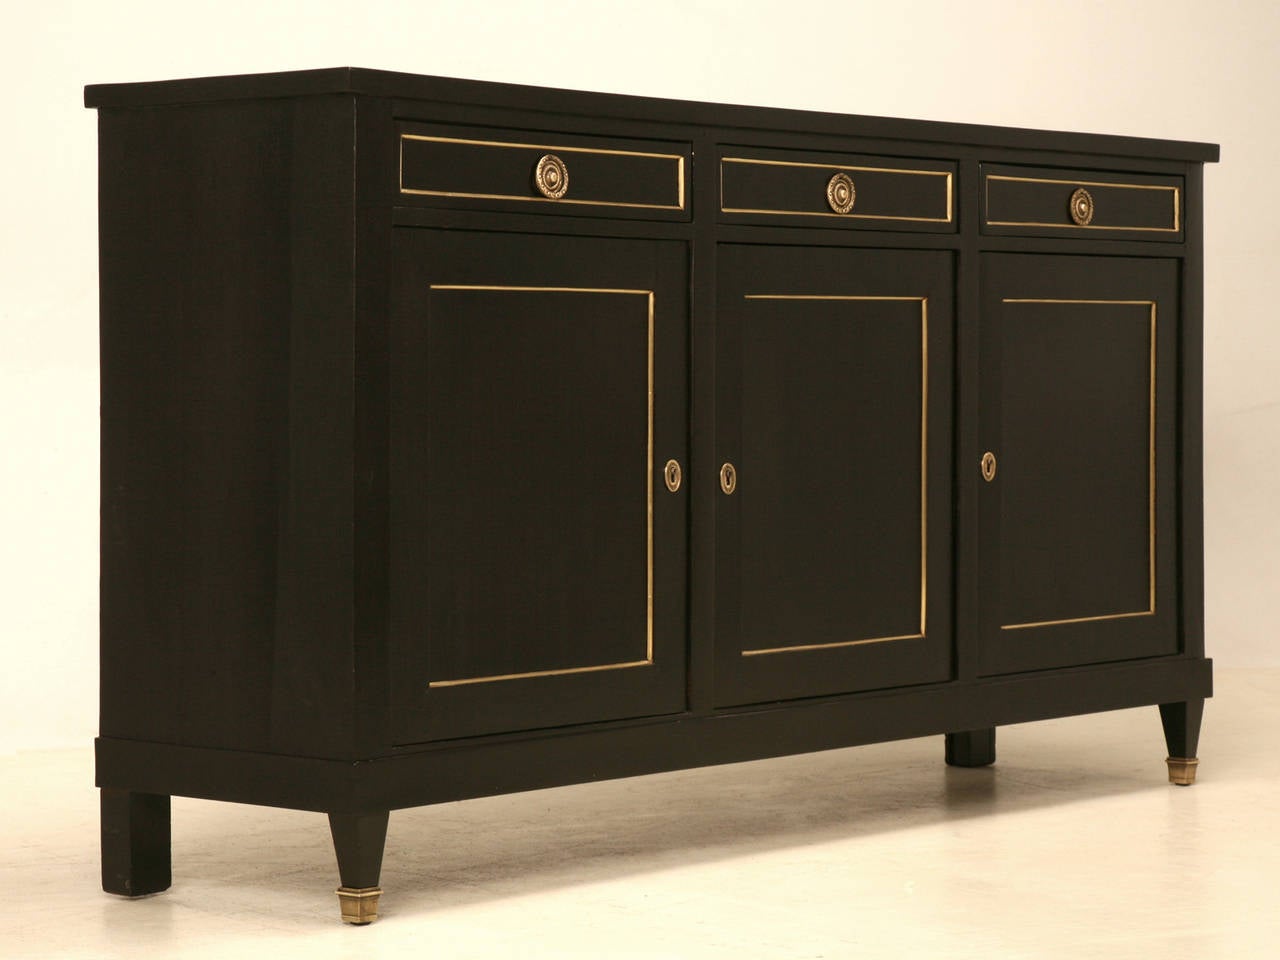 Classic French Louis XVI style buffet done in a proper ebonized finish where hints of brown peek through the black and all the grain of the mahogany remains visible. The black exterior is the antithesis of what you might typically see, because we